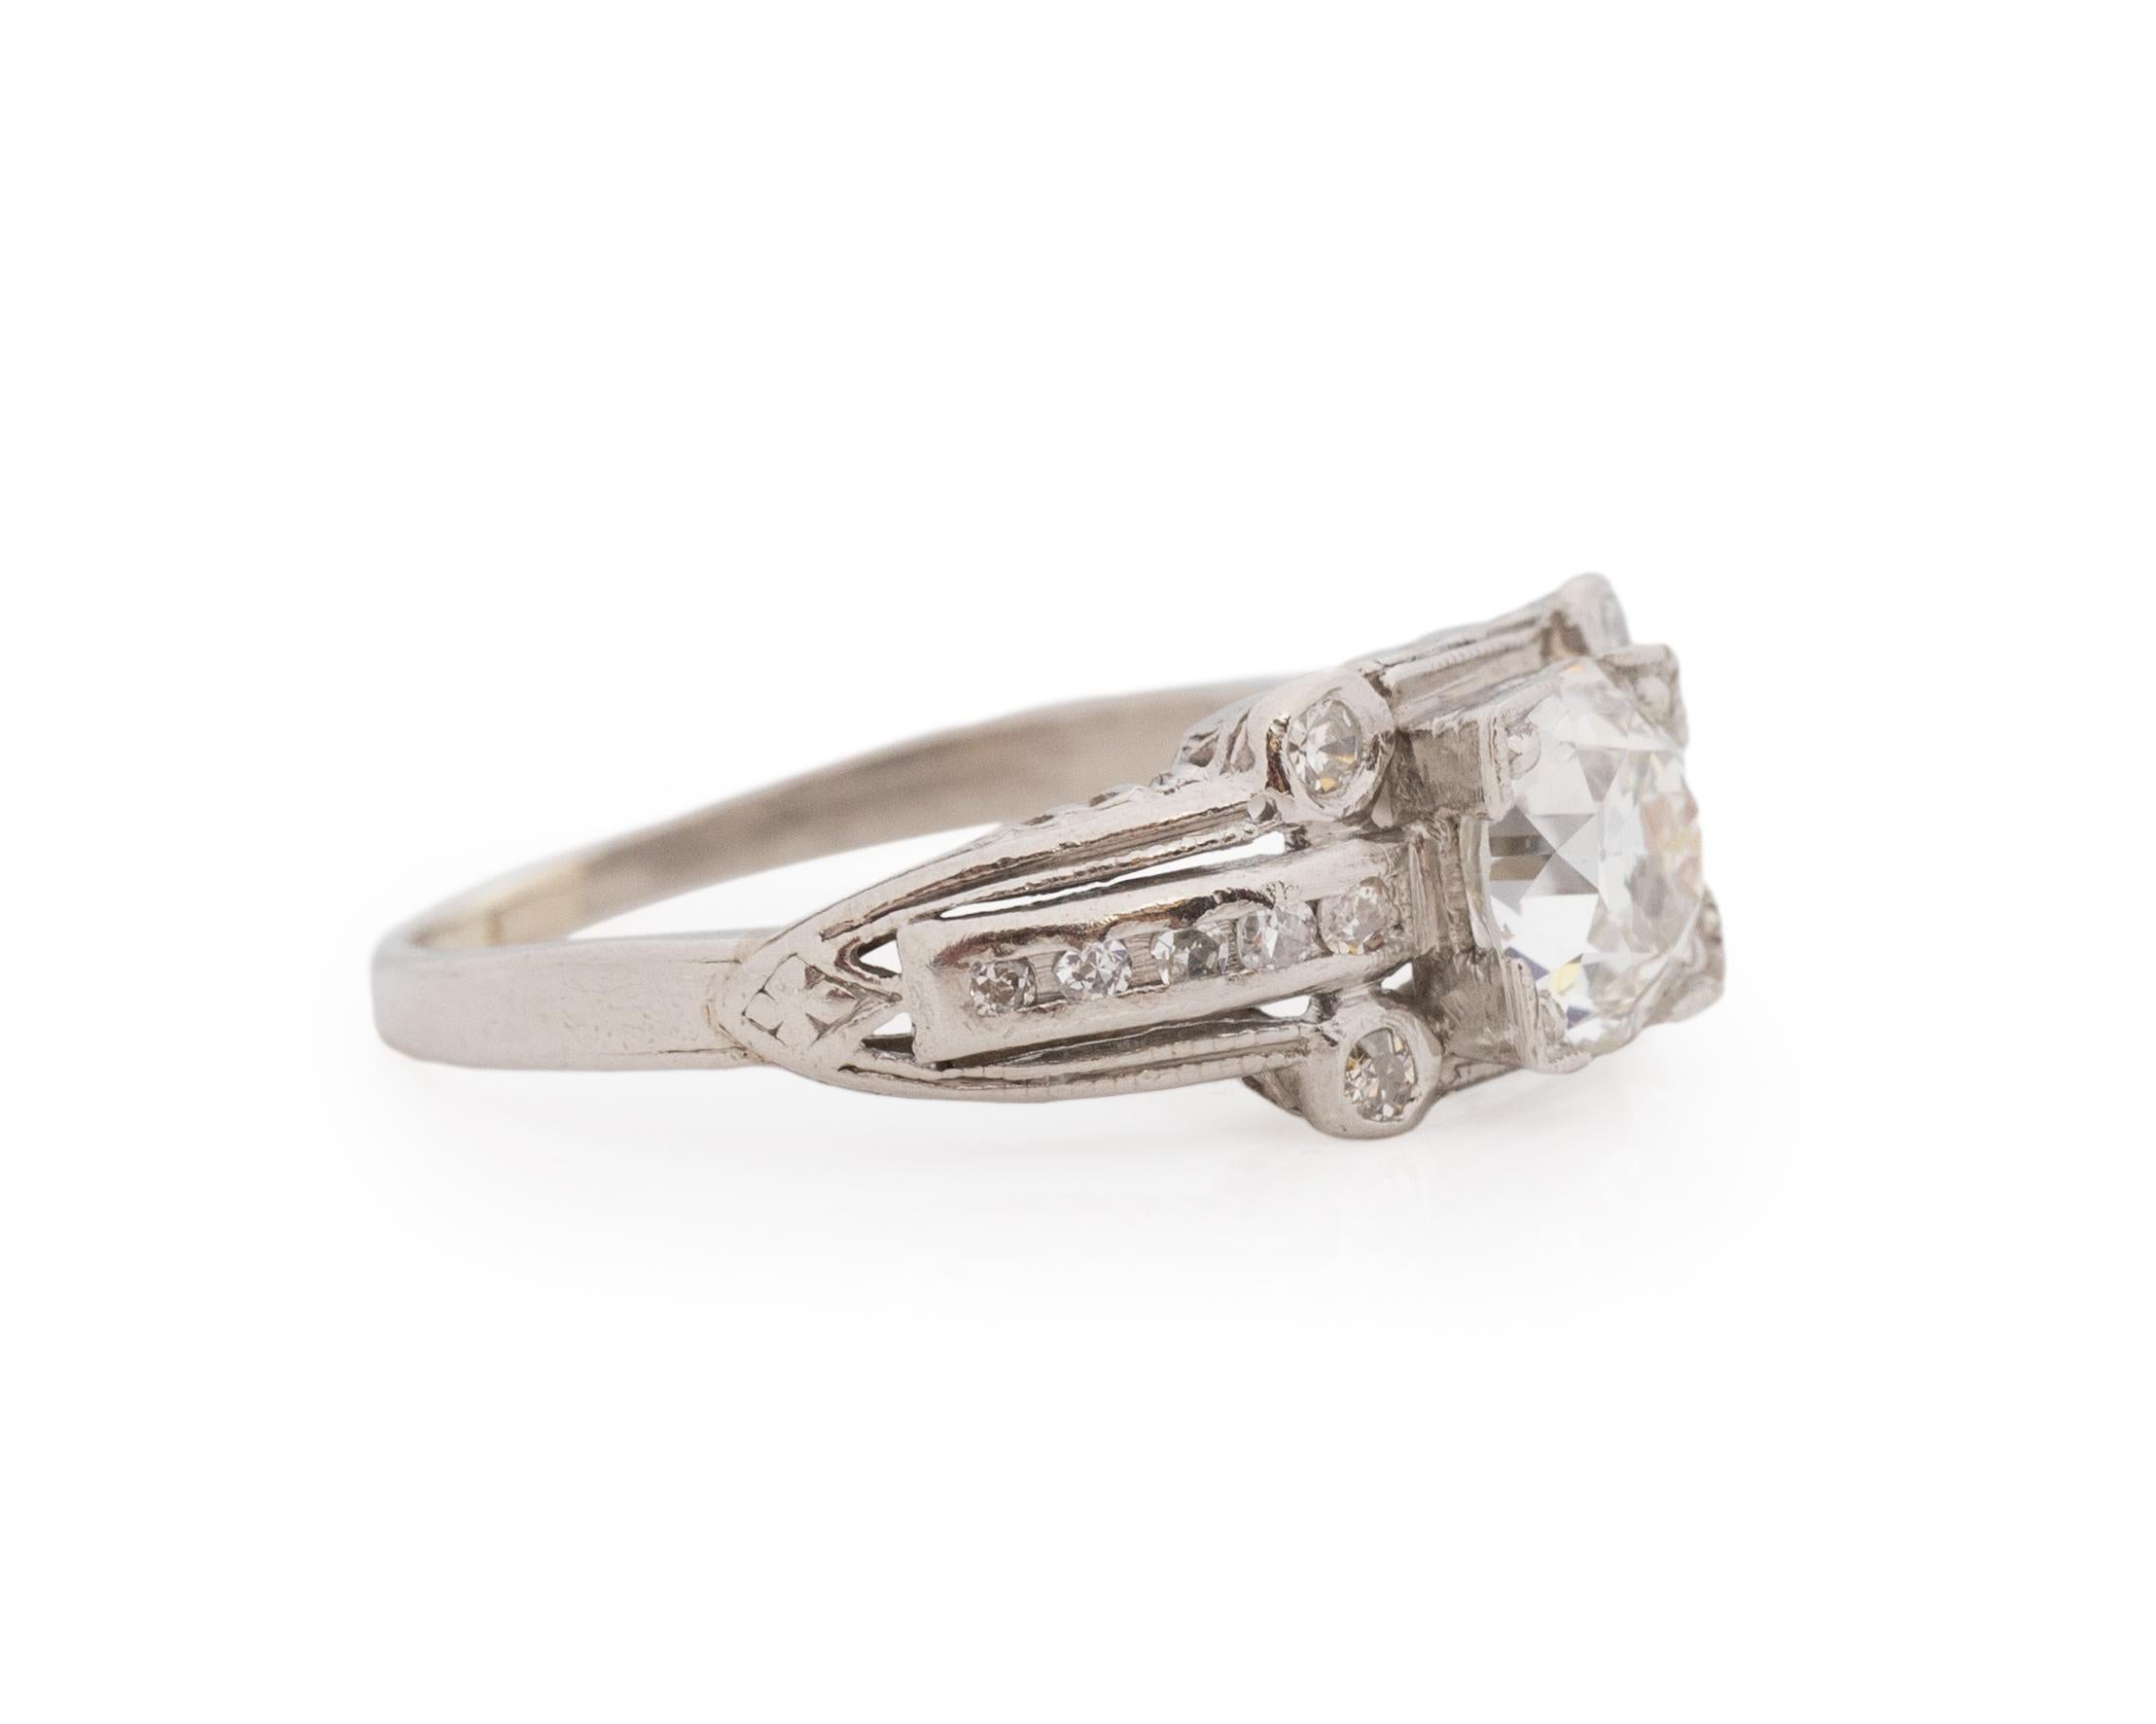 Ring Size: 5.25
Metal Type: Platinum [Hallmarked, and Tested]
Weight: 3.0 grams

Center Diamond Details:
GIA REPORT #: 1425413950
Weight: .82ct
Cut: Old European brilliant
Color: G
Clarity: SI1
Measurements: 5.92mm x 5.85mm x 3.82mm

Side Stone